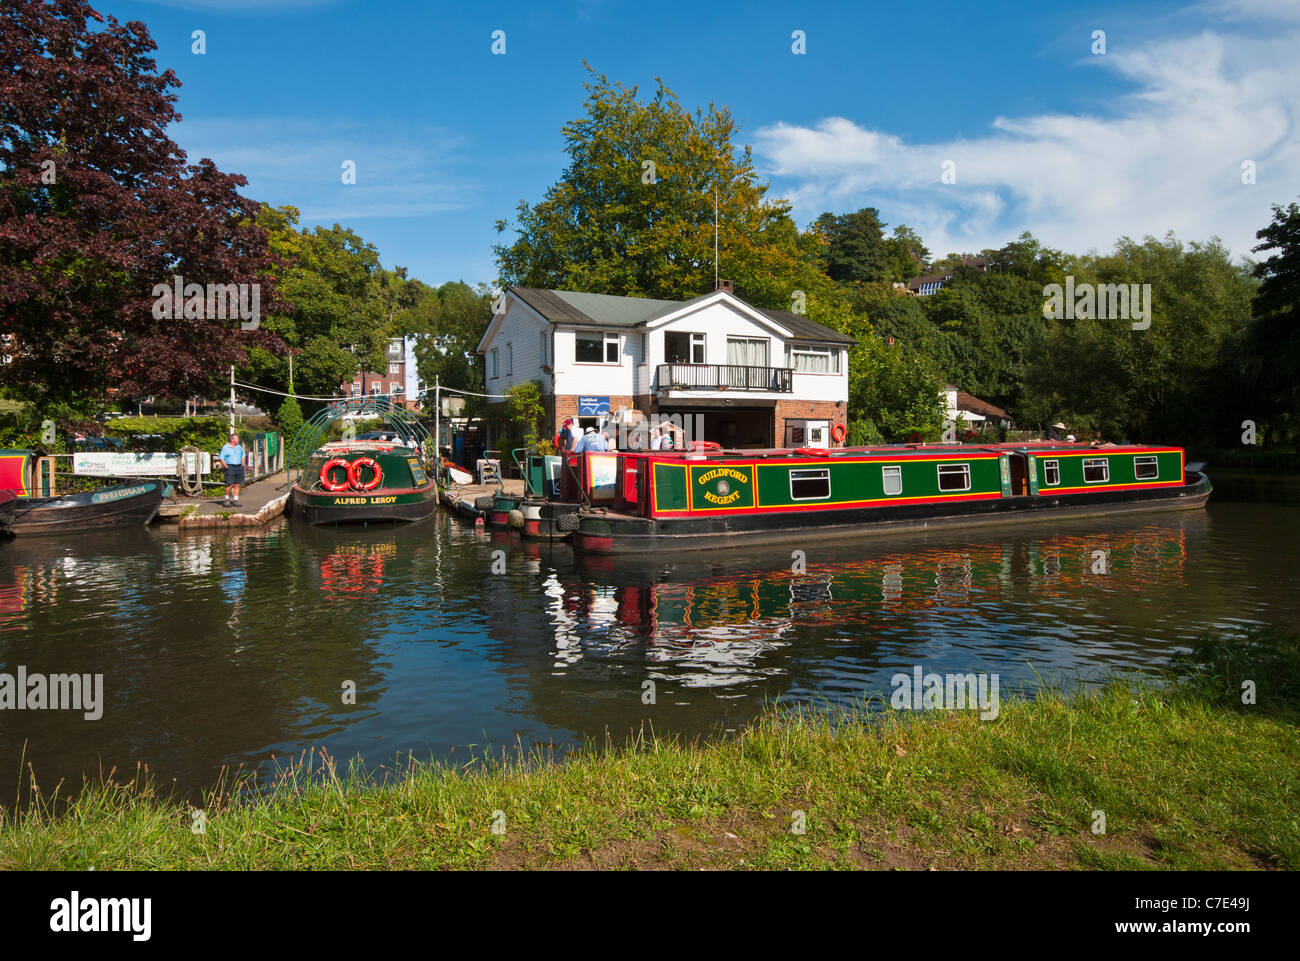 Canal Narrow Boats Narrowboats Moored By The Boathouse On The River Wey Guildford Surrey England UK Stock Photo